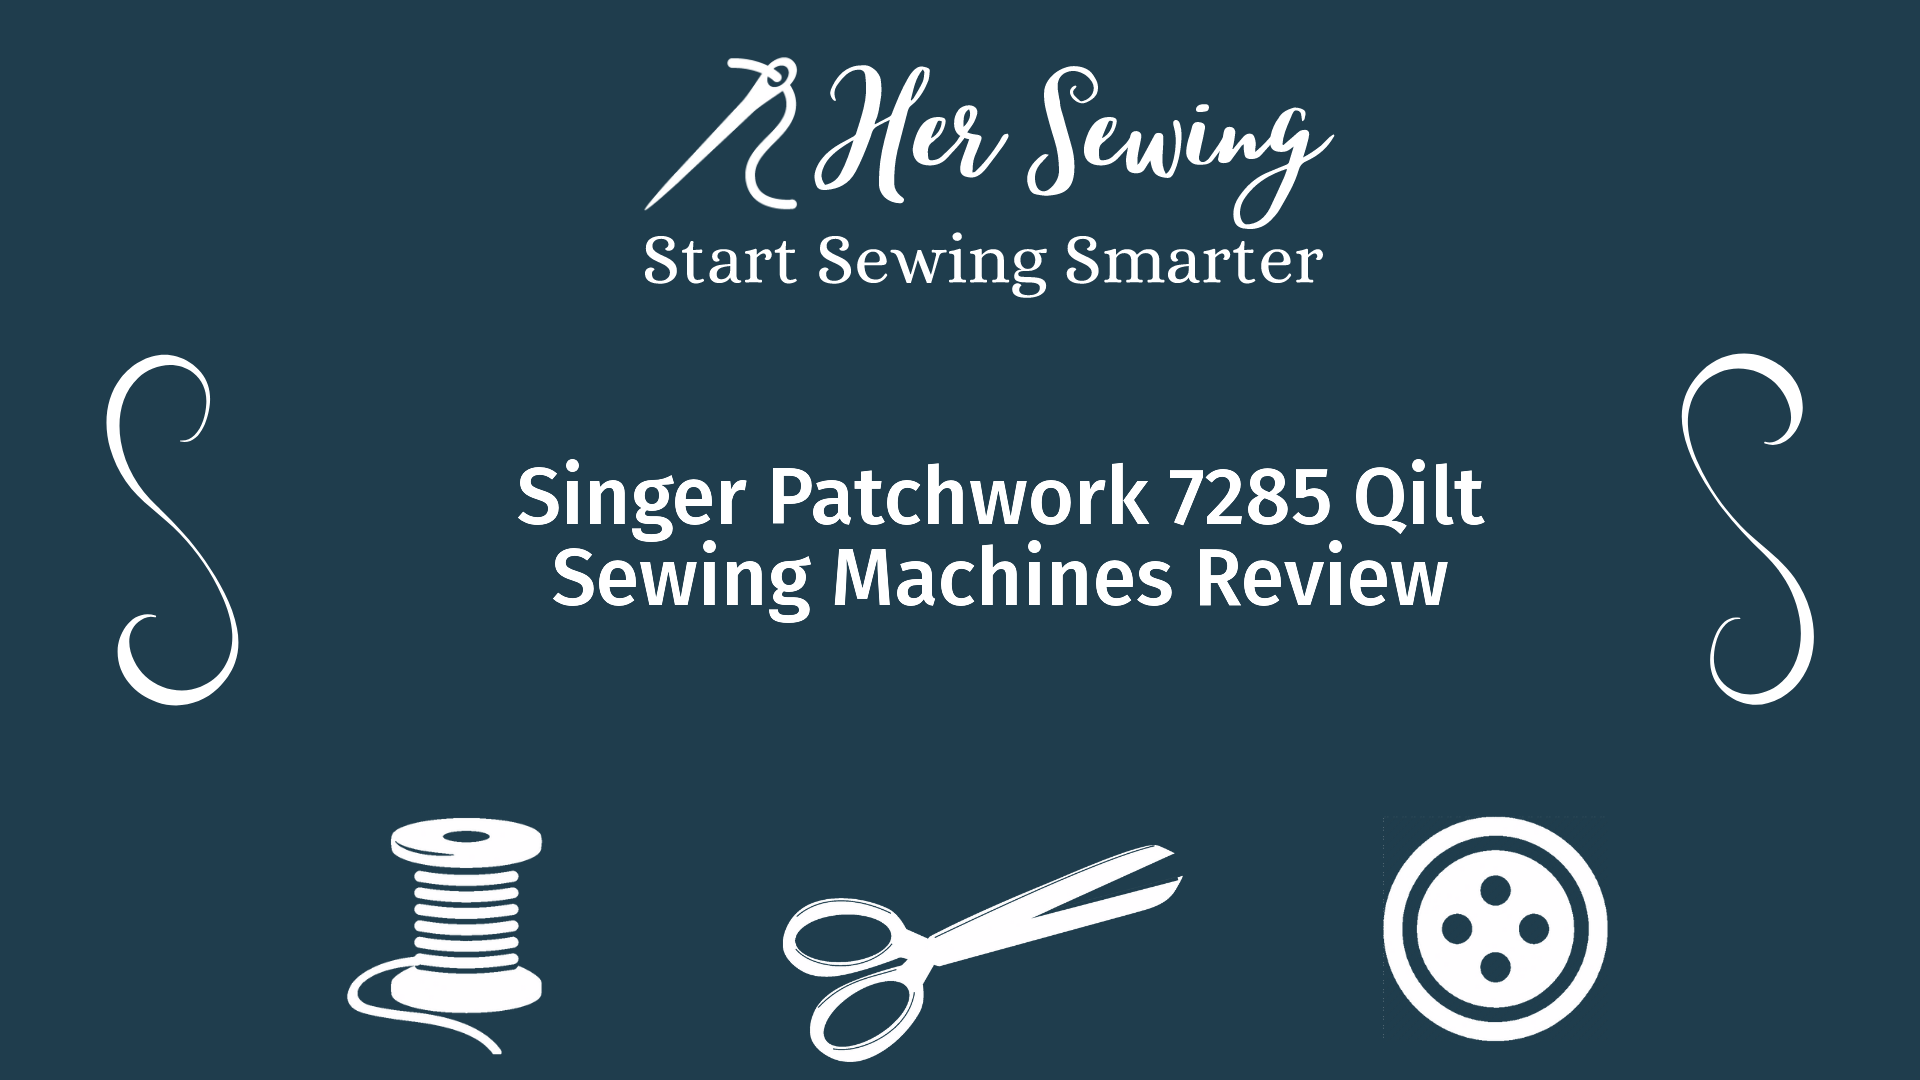 Singer Patchwork 7285 Qilt Sewing Machines Review